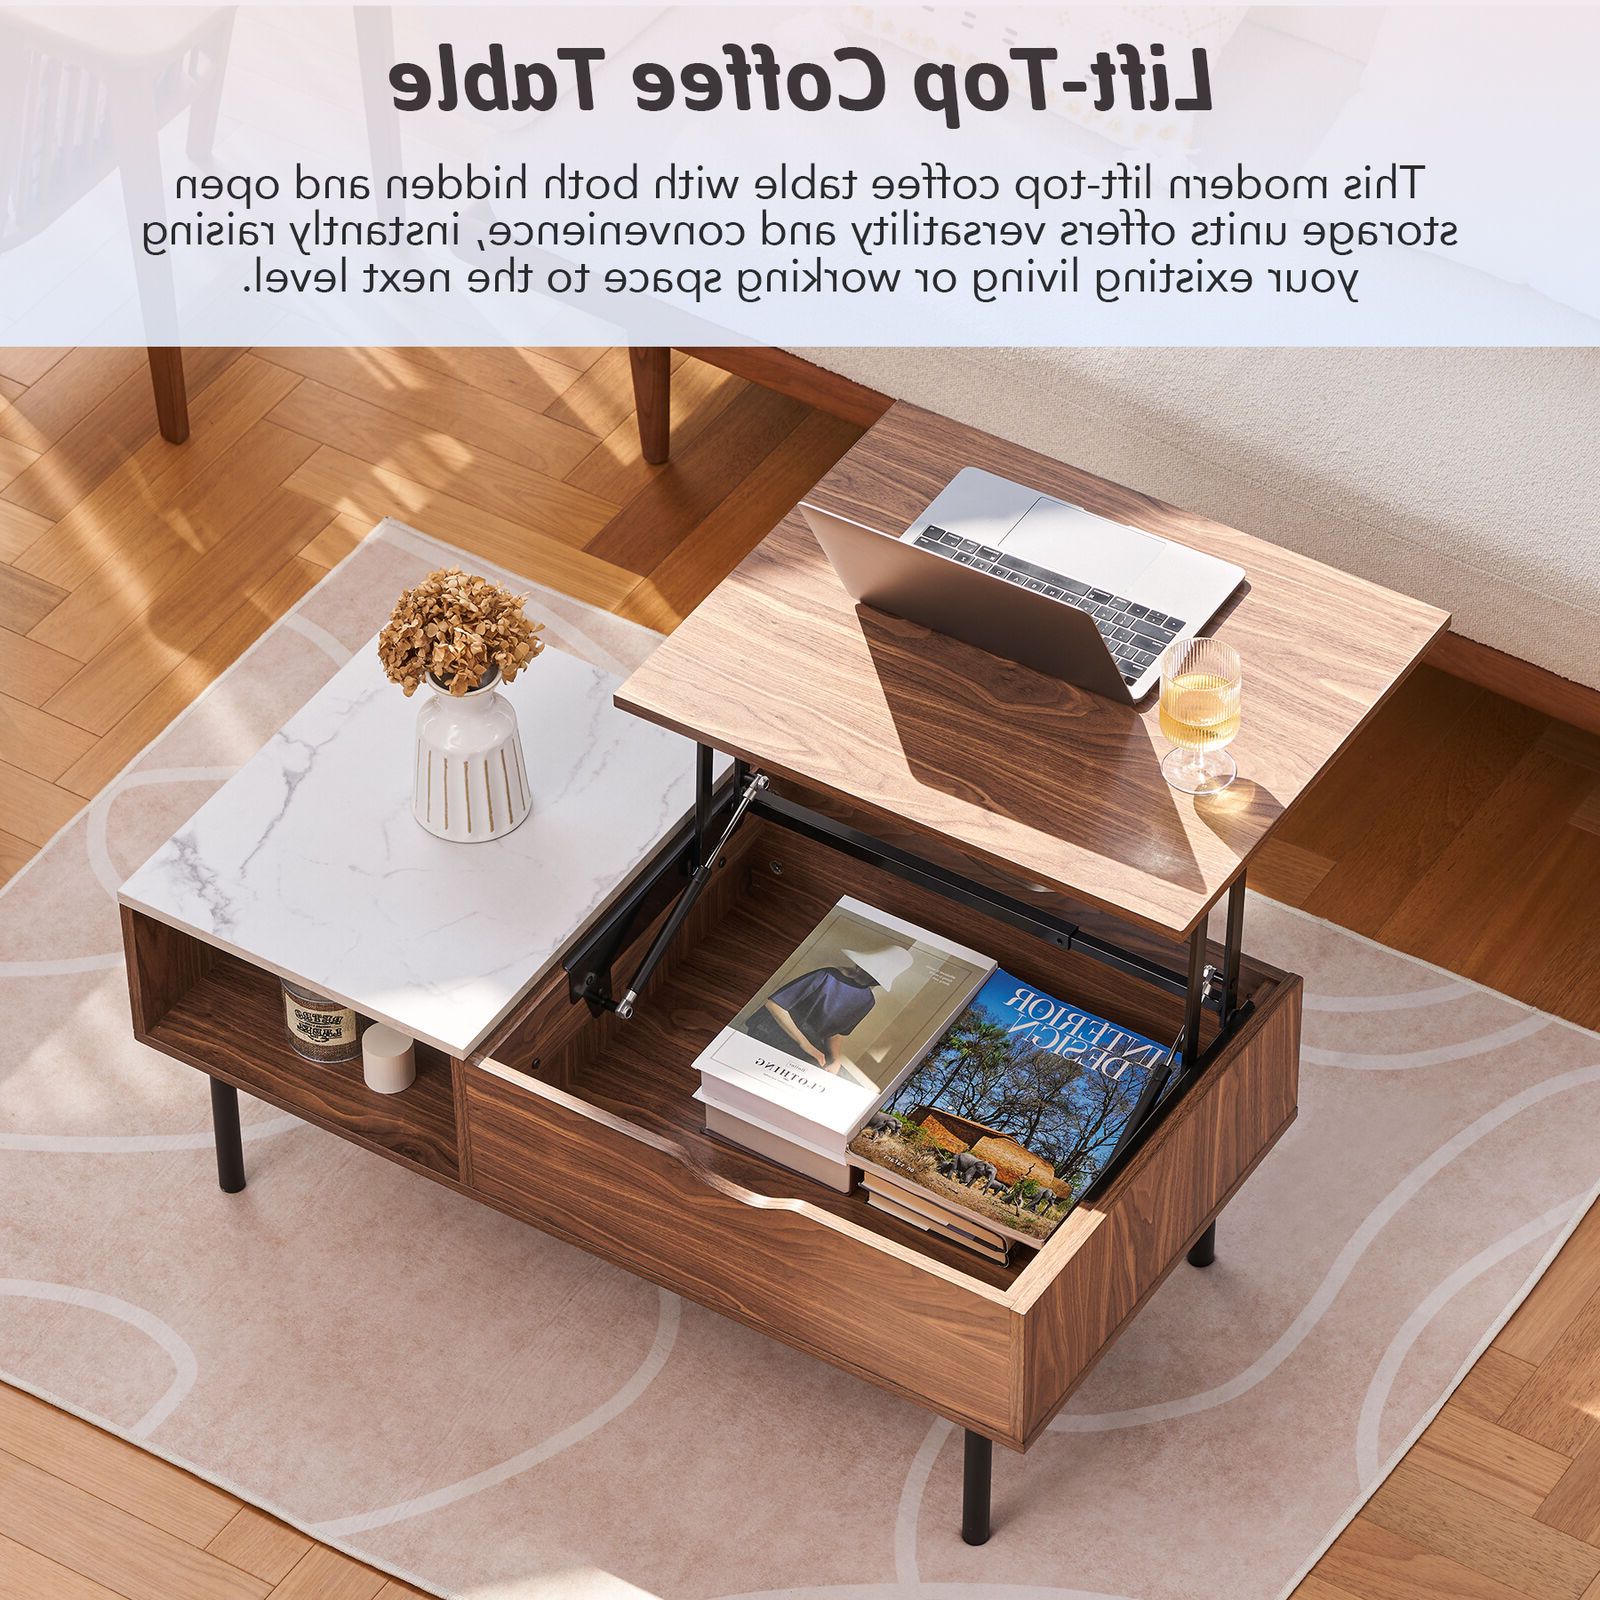 Ebay Regarding Latest Lift Top Coffee Tables With Hidden Storage Compartments (View 7 of 10)